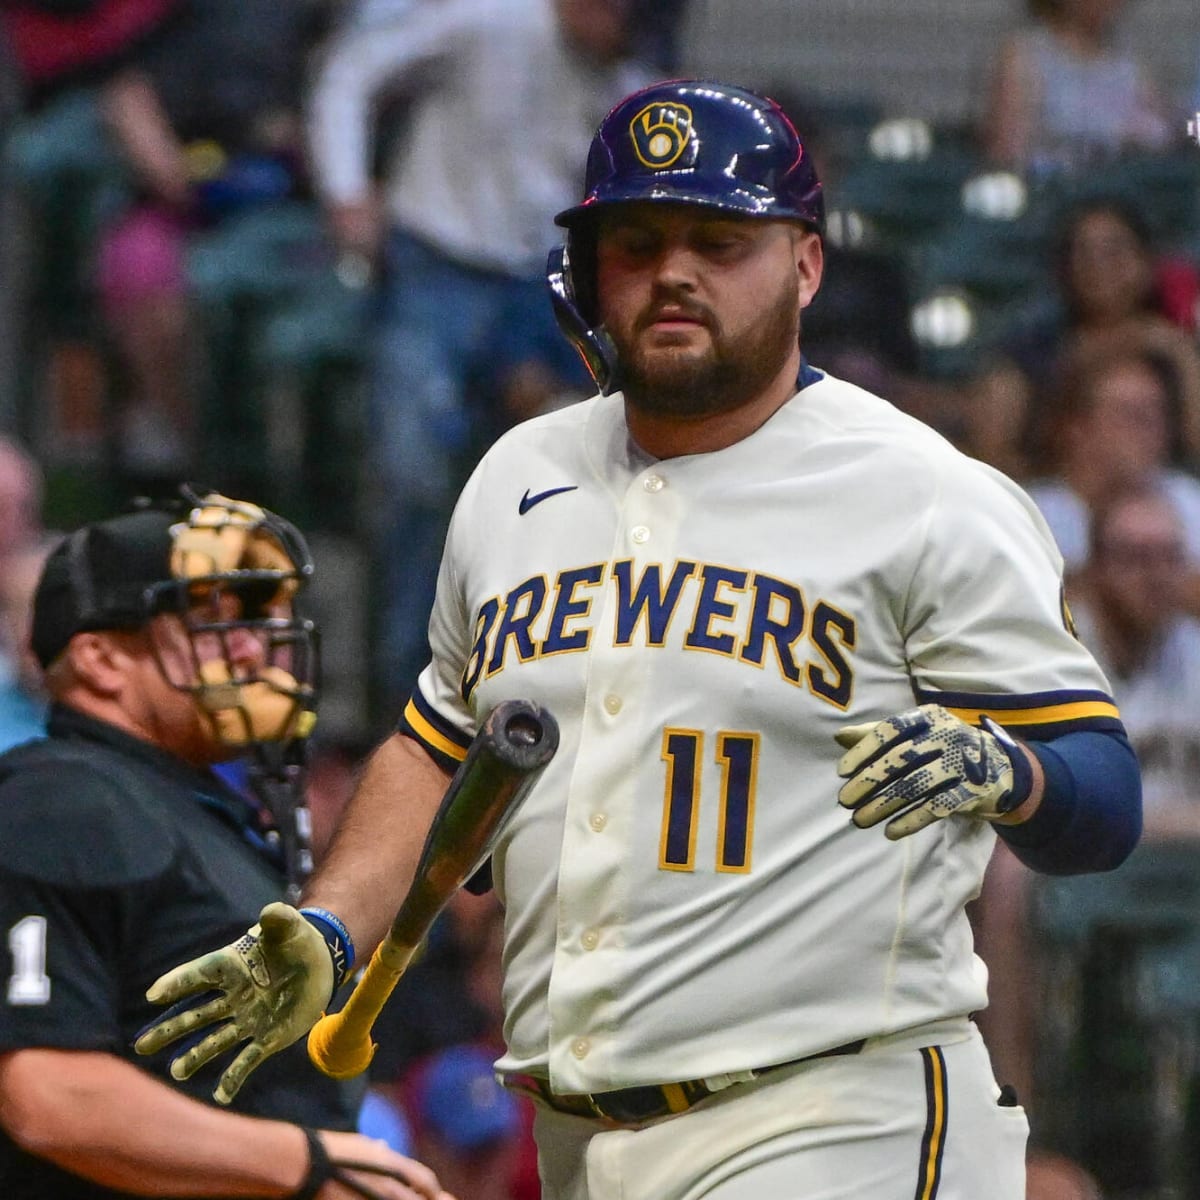 Poll: Eric Thames' 2020 contract option - Brew Crew Ball